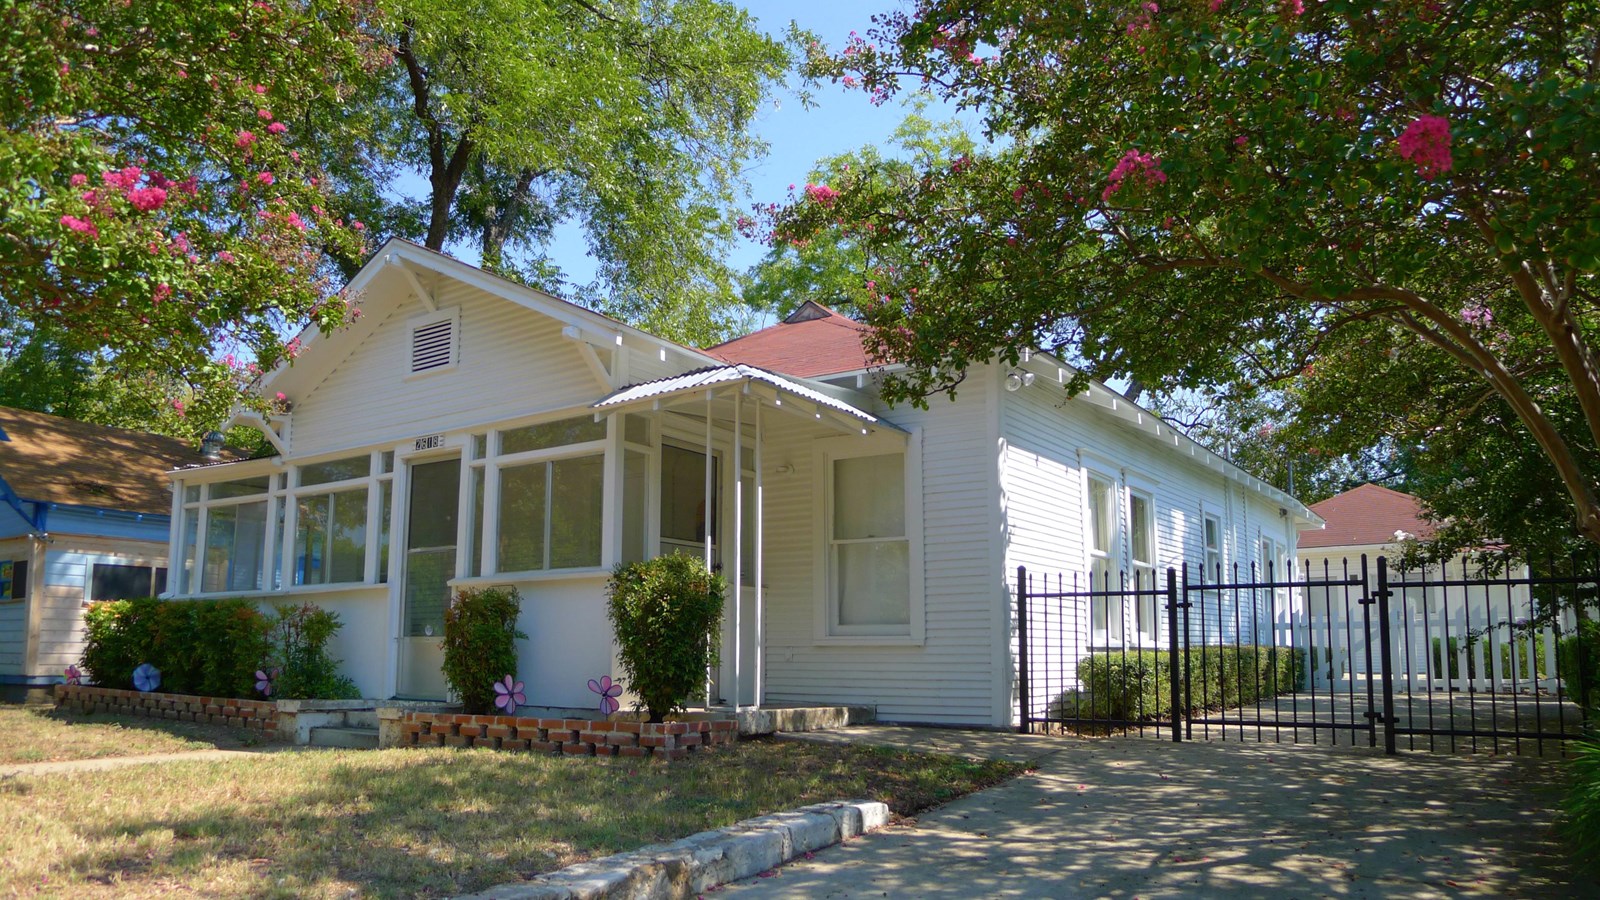 White ranch-style home with small side porch. Photo by Drewp4vp, CC BY-SA 3.0